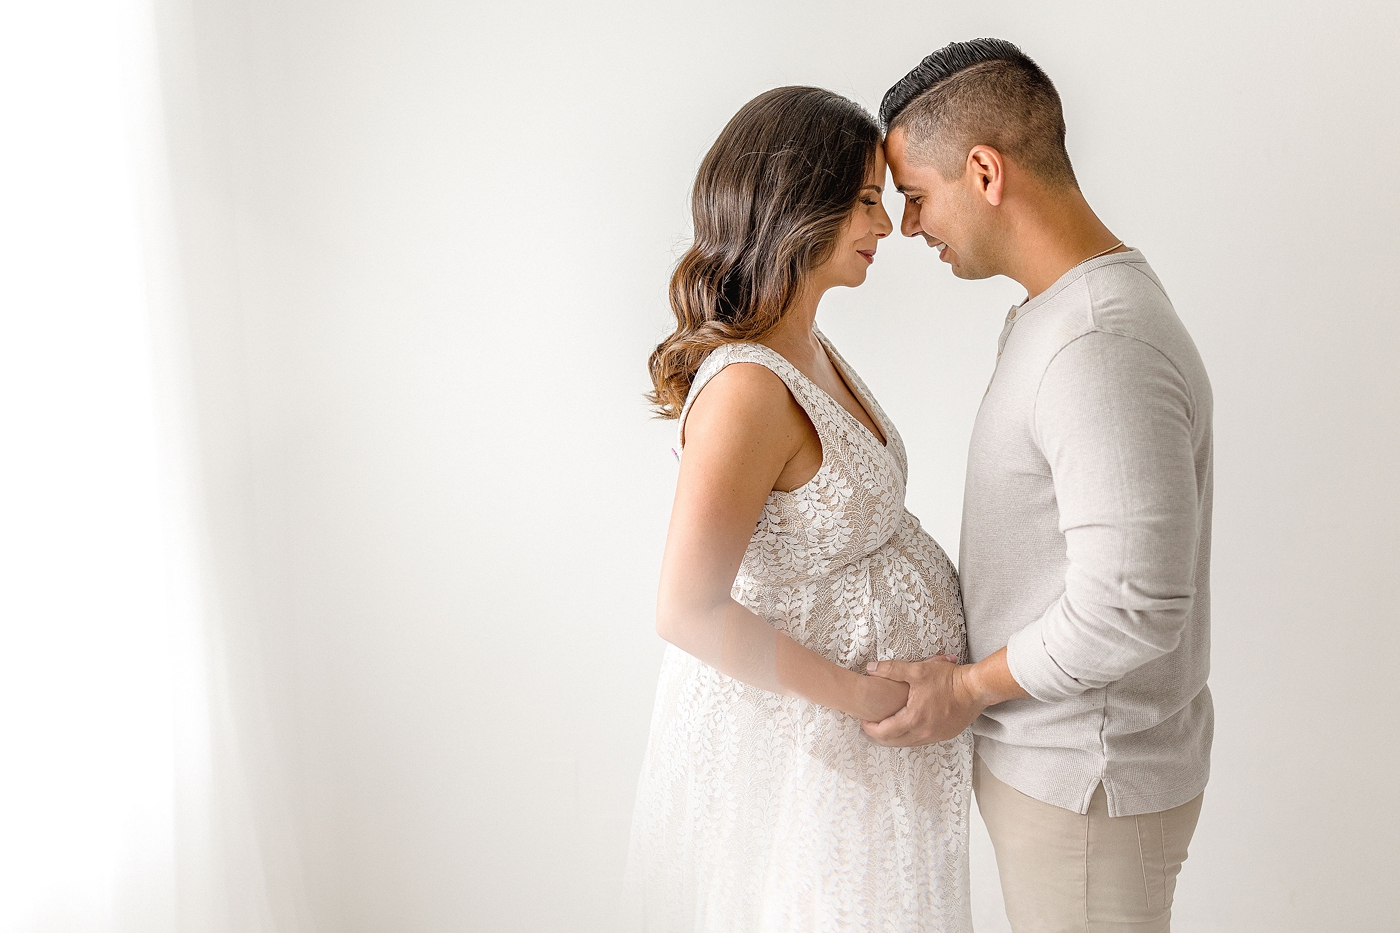 Mom and dad rest heads together during Miami maternity session. Photo by Ivanna Vidal Photography.